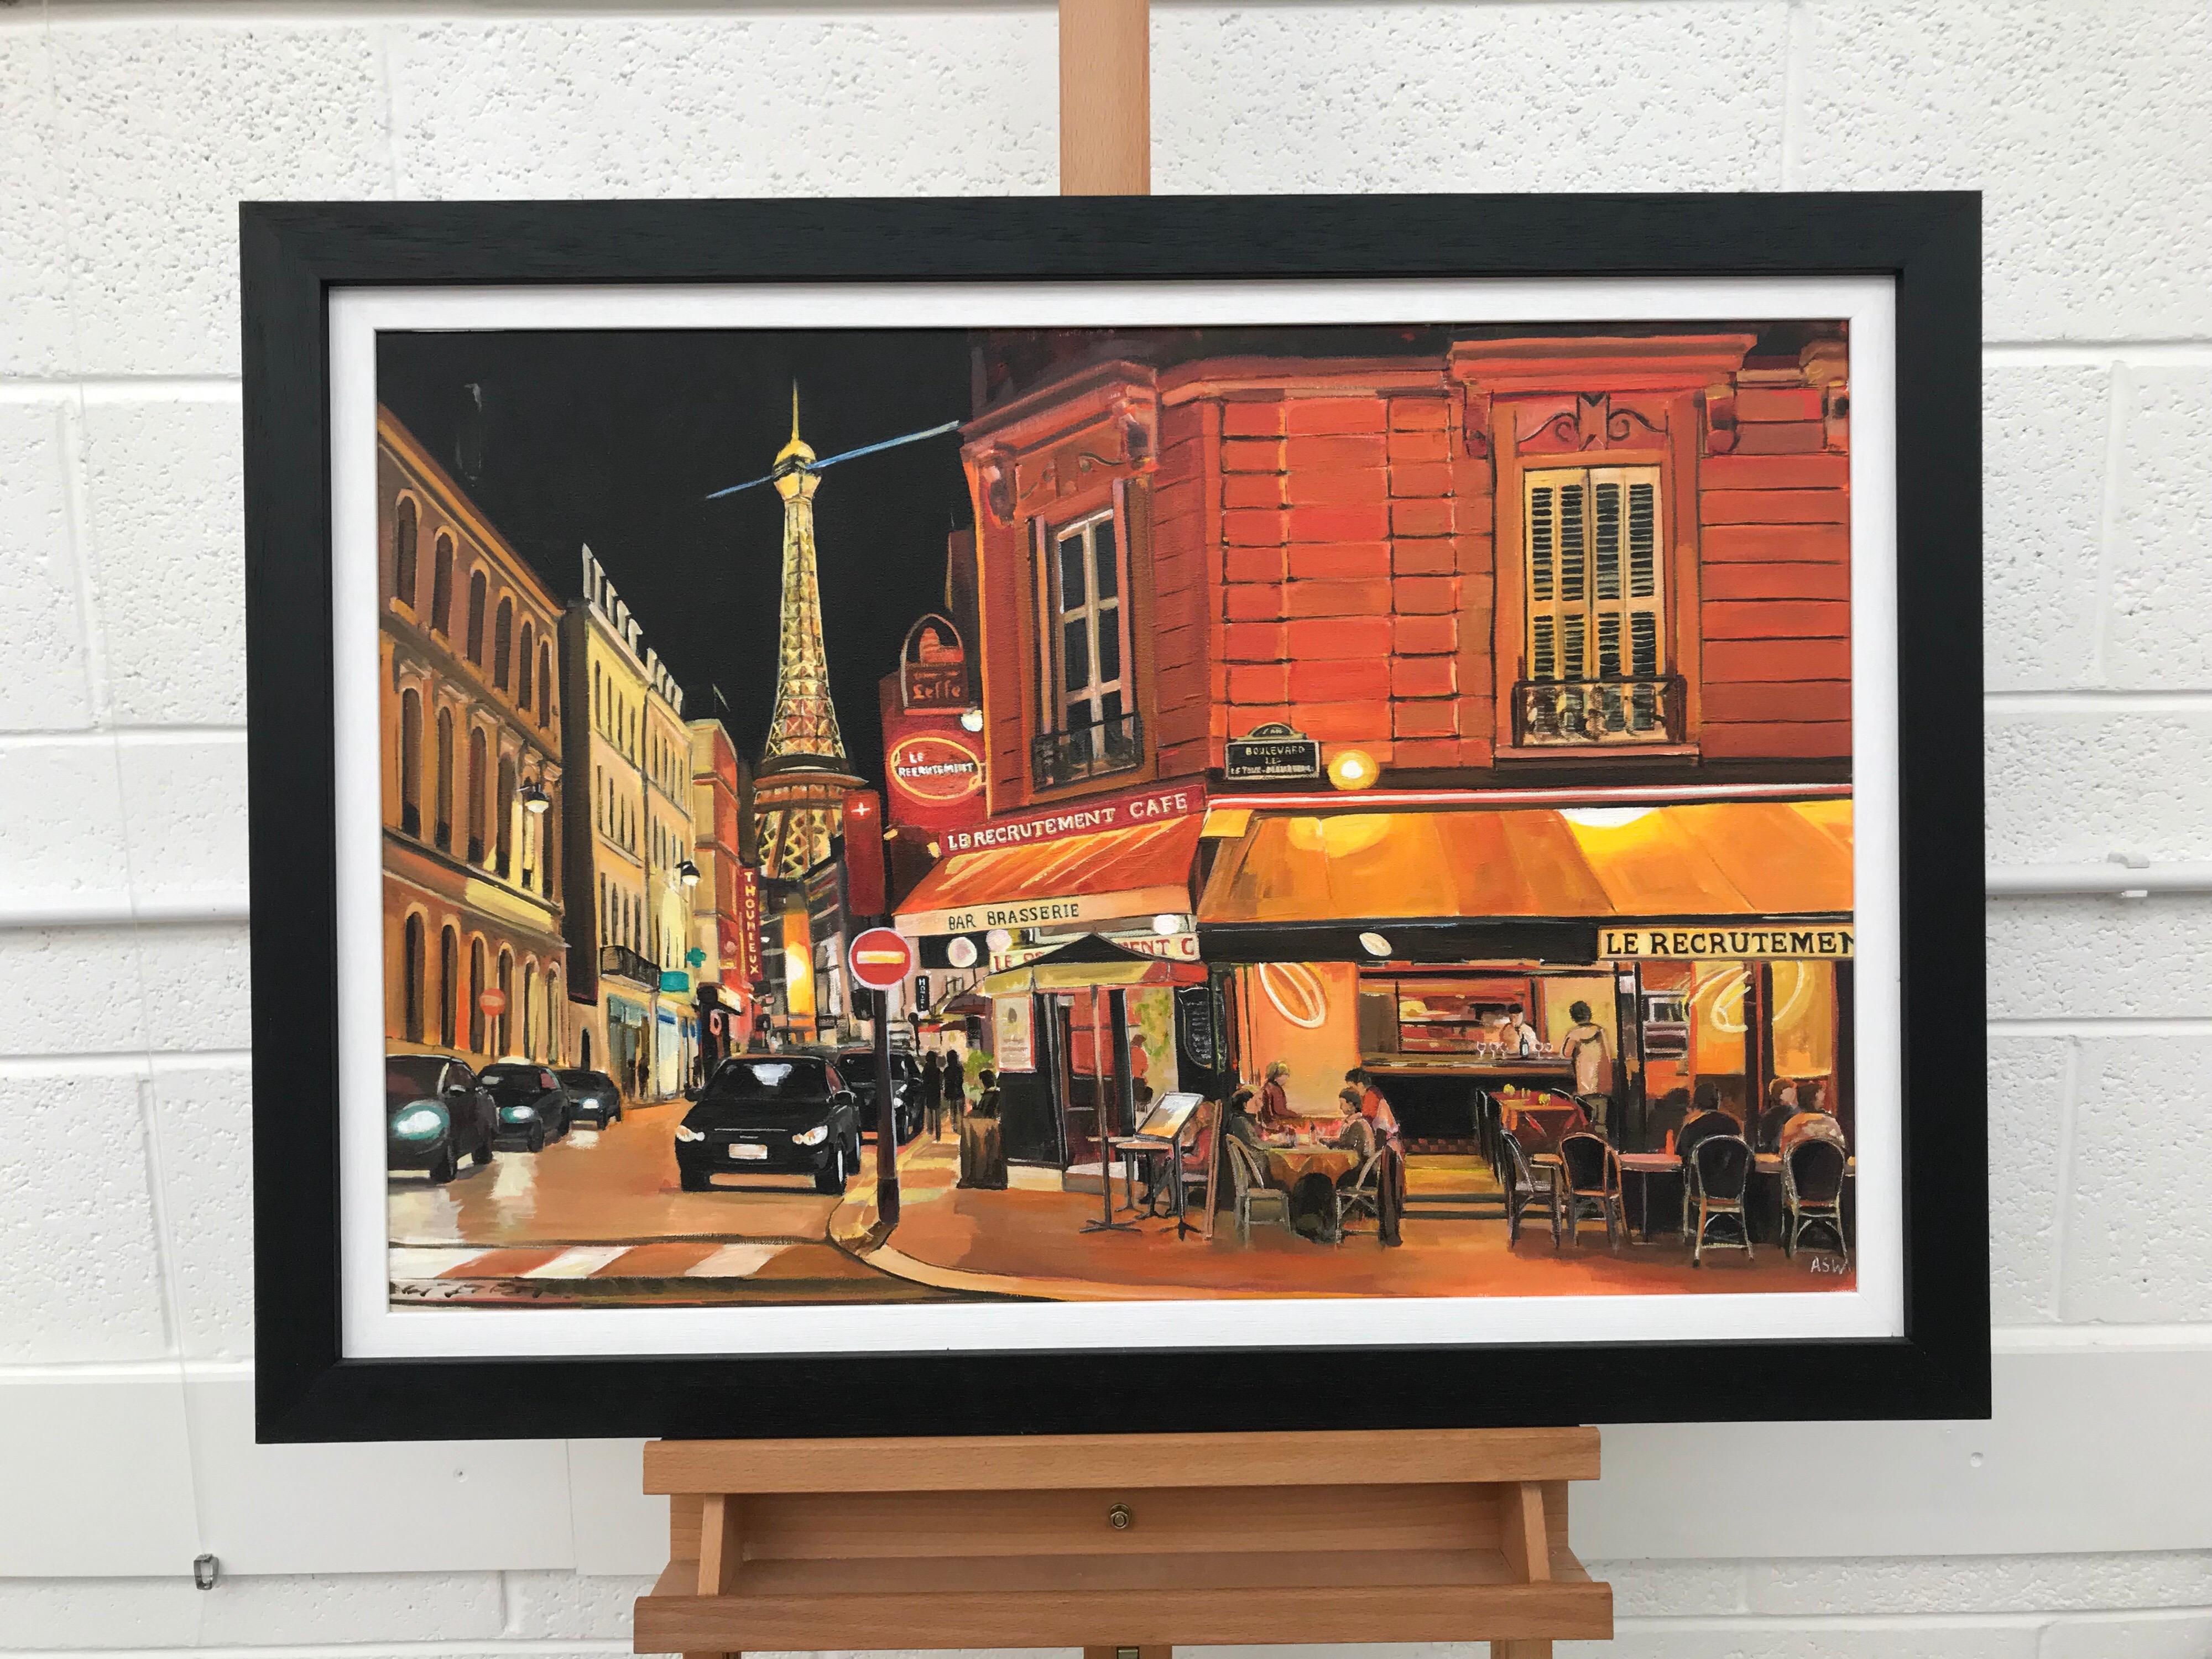 'Parisian Café' - Eiffel Tower, Paris, France by British Urban Landscape Artist. An original painting from Angela's European Series, incorporating the Eiffel Tower - one of the most iconic structures in Europe. The Parisian Café is Le Recrutement,